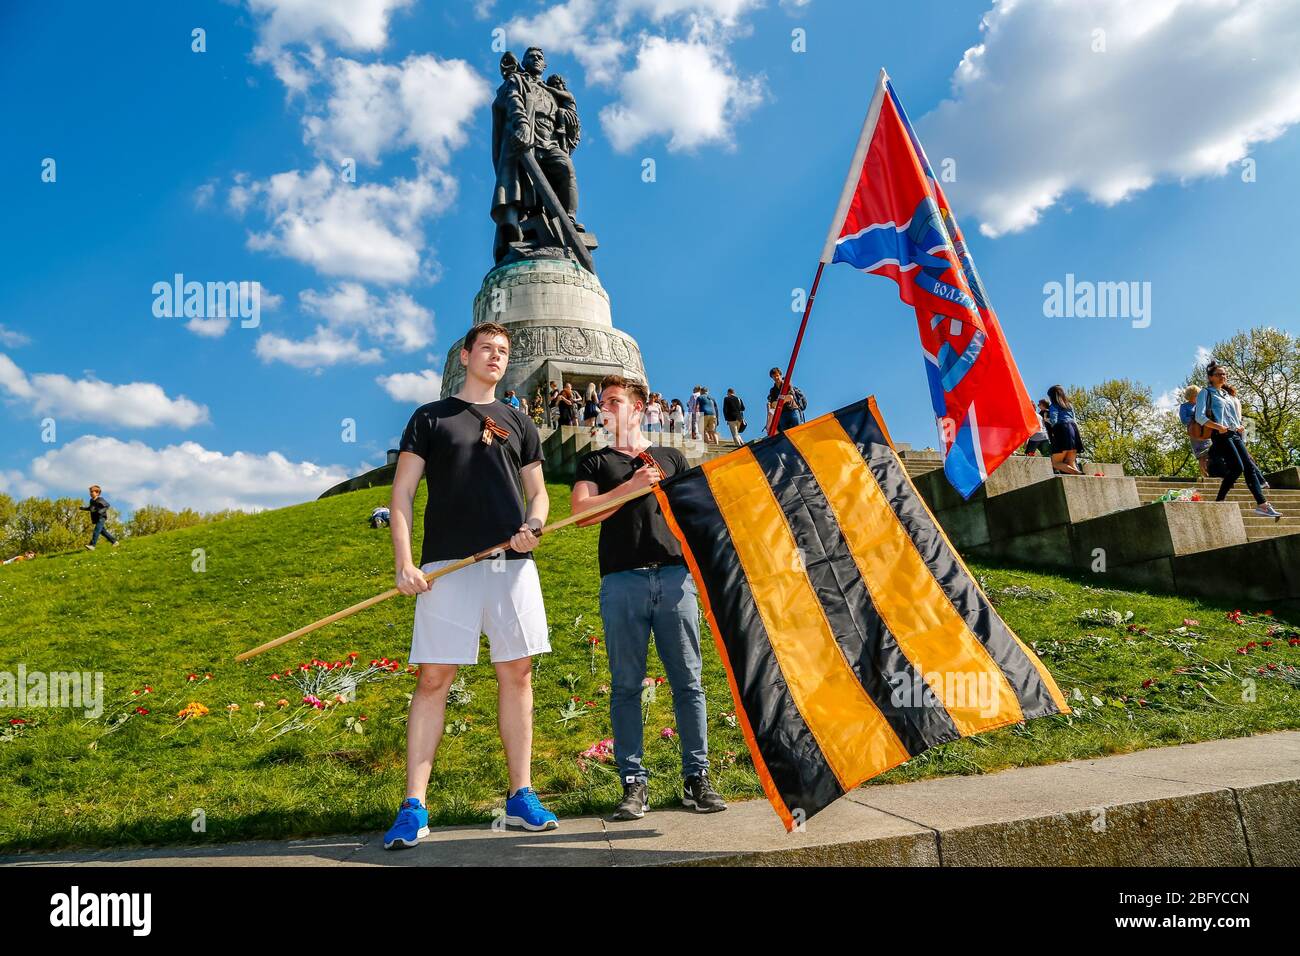 May 9, 2016, Berlin, at the Soviet War Memorial in Treptower Park (Treptower War Memorial), a memorial and at the same time a military cemetery, numerous Russians and German-Russians with many colorful flags commemorate the 71st day of victory at the end of the Second World War. The memorial was erected in Germany in 1949 on the instructions of the Soviet military administration to honor the soldiers of the Red Army who died in World War II. Over 7000 of the soldiers who died in the Schlaughs around Berlin are buried here. Young people with the orange-black-striped flag, which represents the S Stock Photo